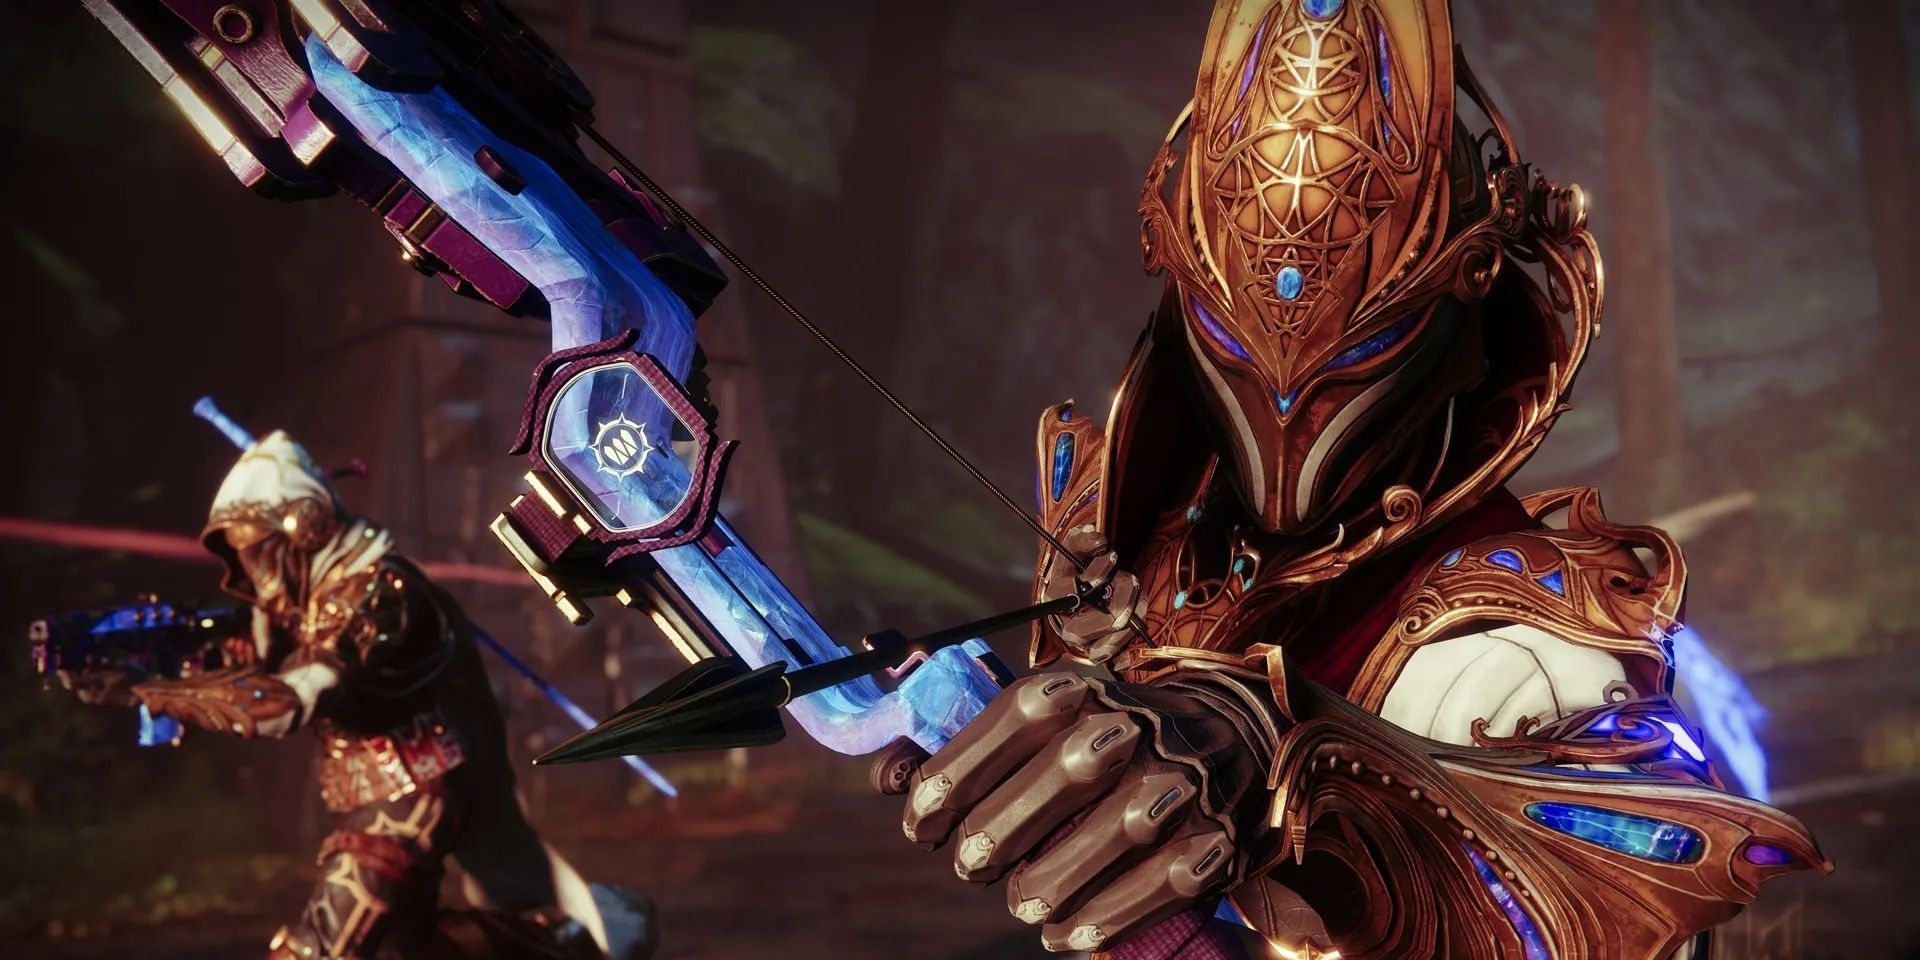 A Destiny 2 Warlock using the Season of Defiance Ornament armor set pulling on the Raconteur bow. There is a Hunter beside him carrying a rifle.